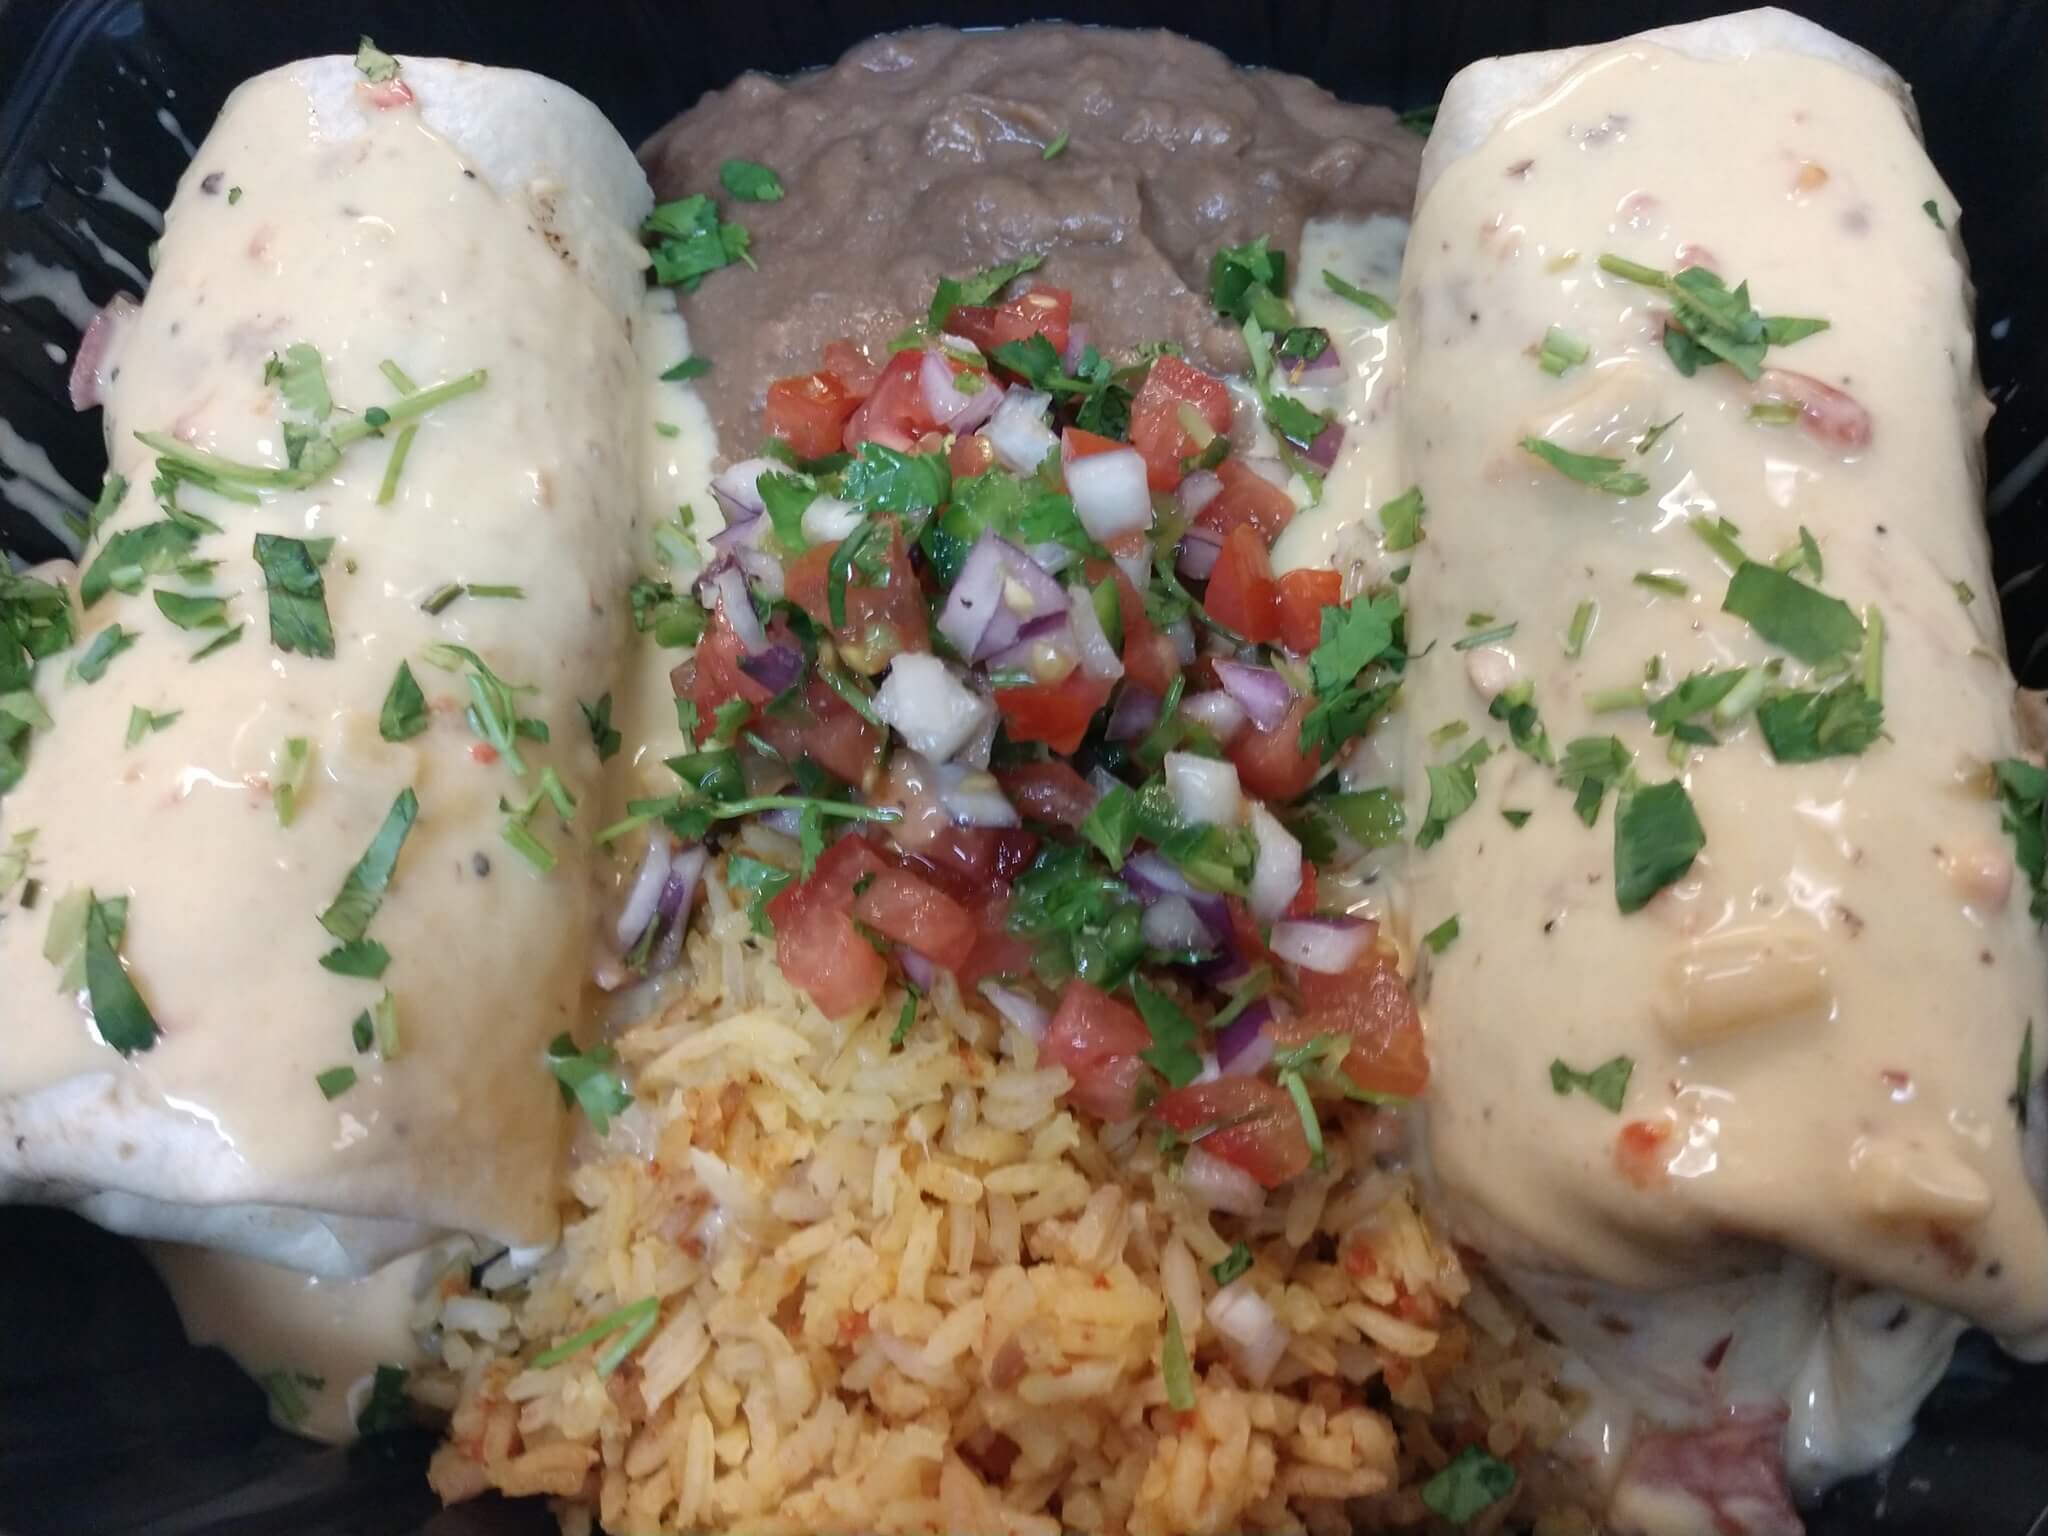 Specialty burrito box (two burritos with rice and in the middle top with chop tomatoes, onion and cilantro)